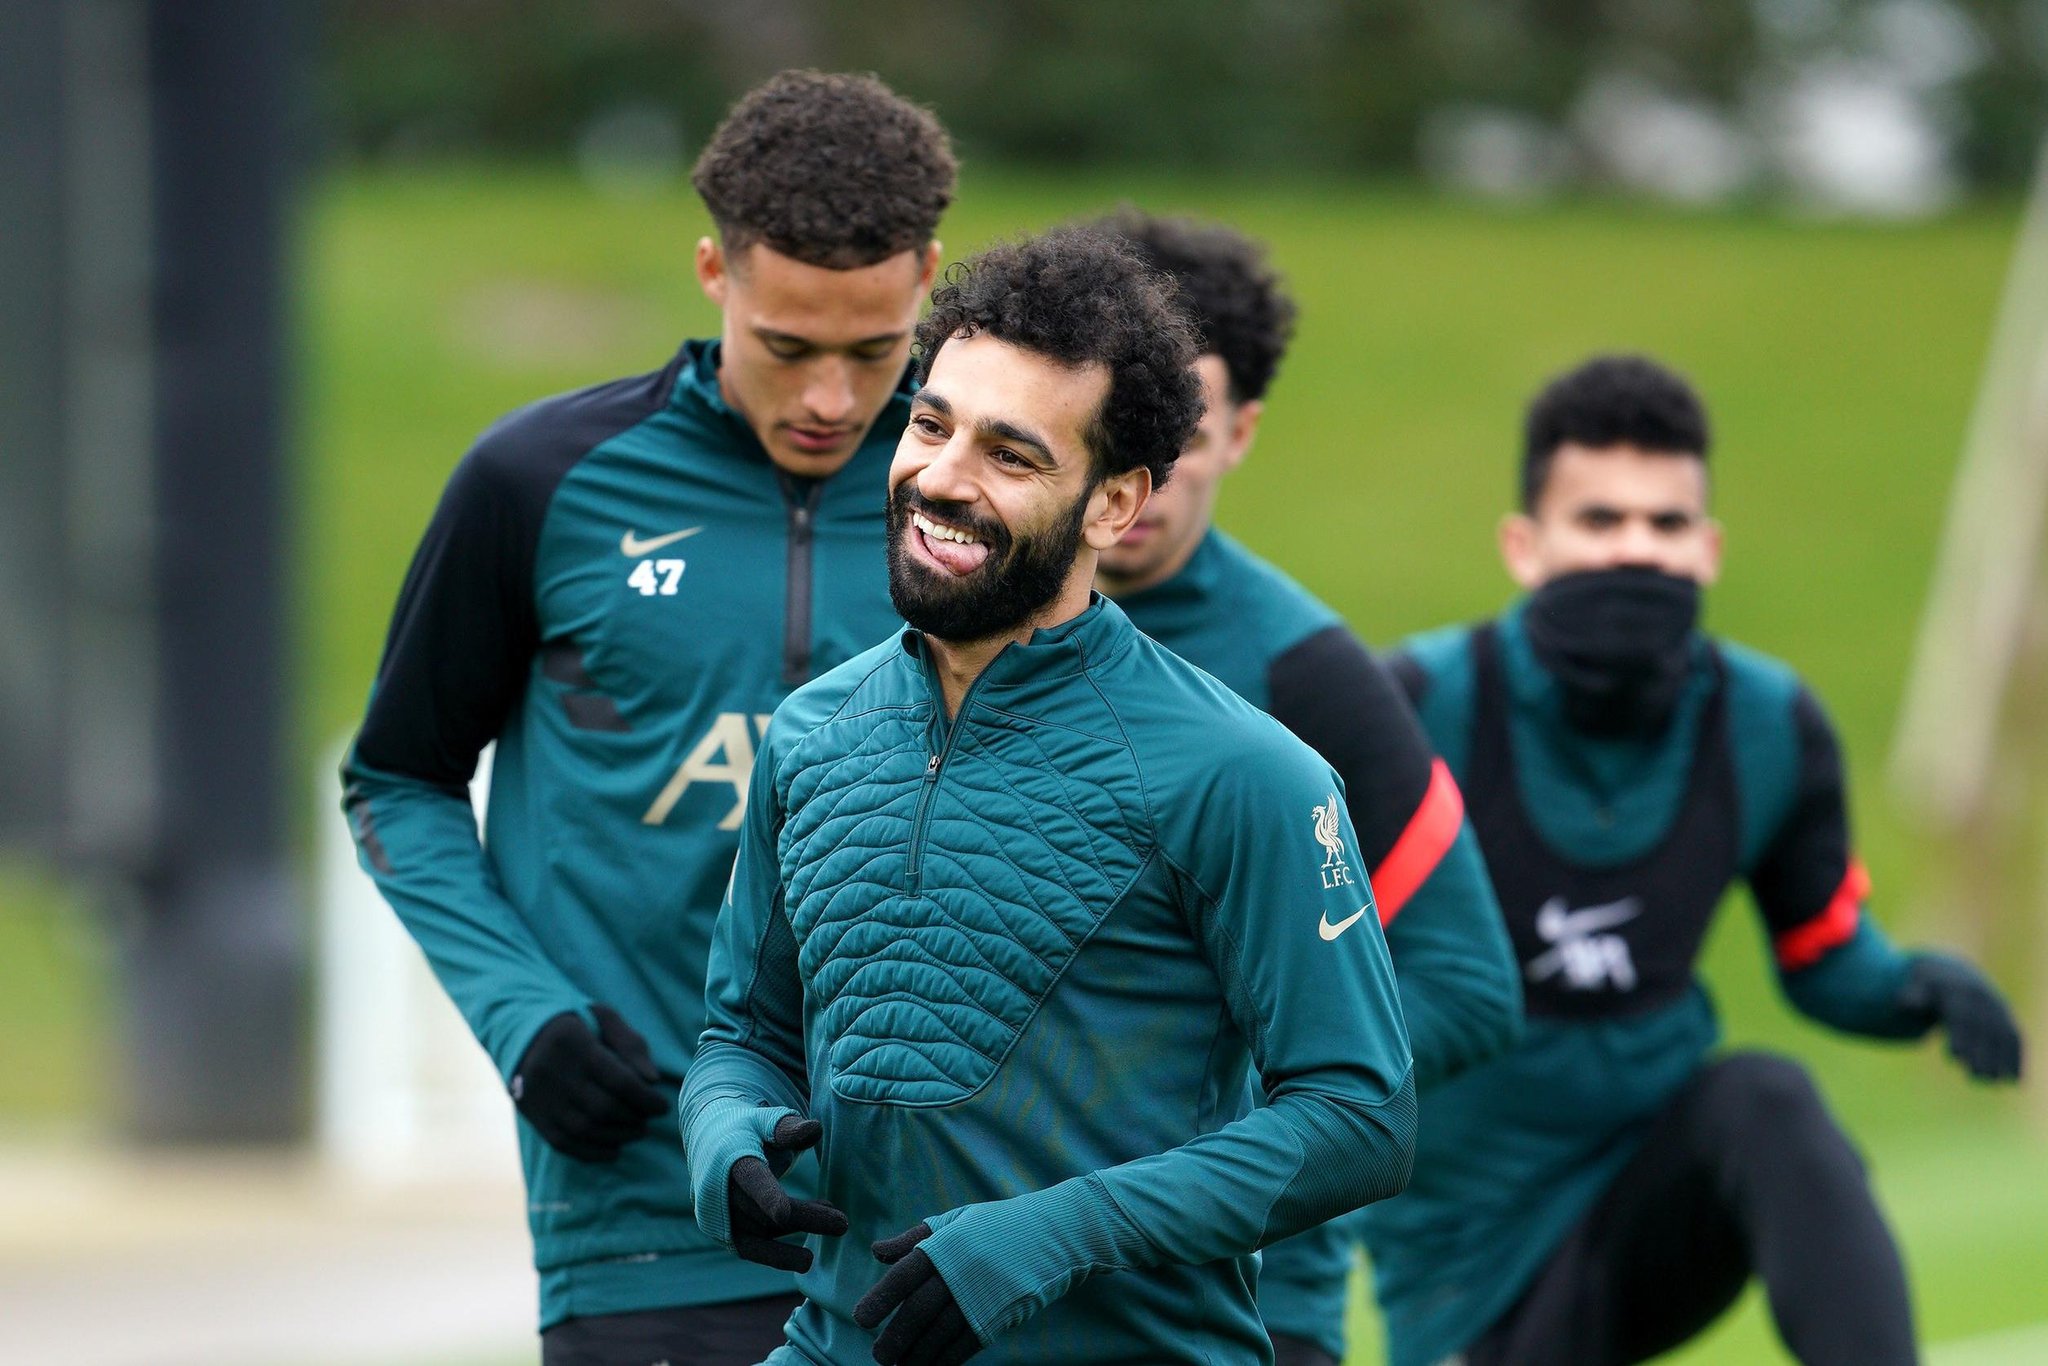 Jurgen Klopp 'happy' with Mohamed Salah's contract situation at Liverpool